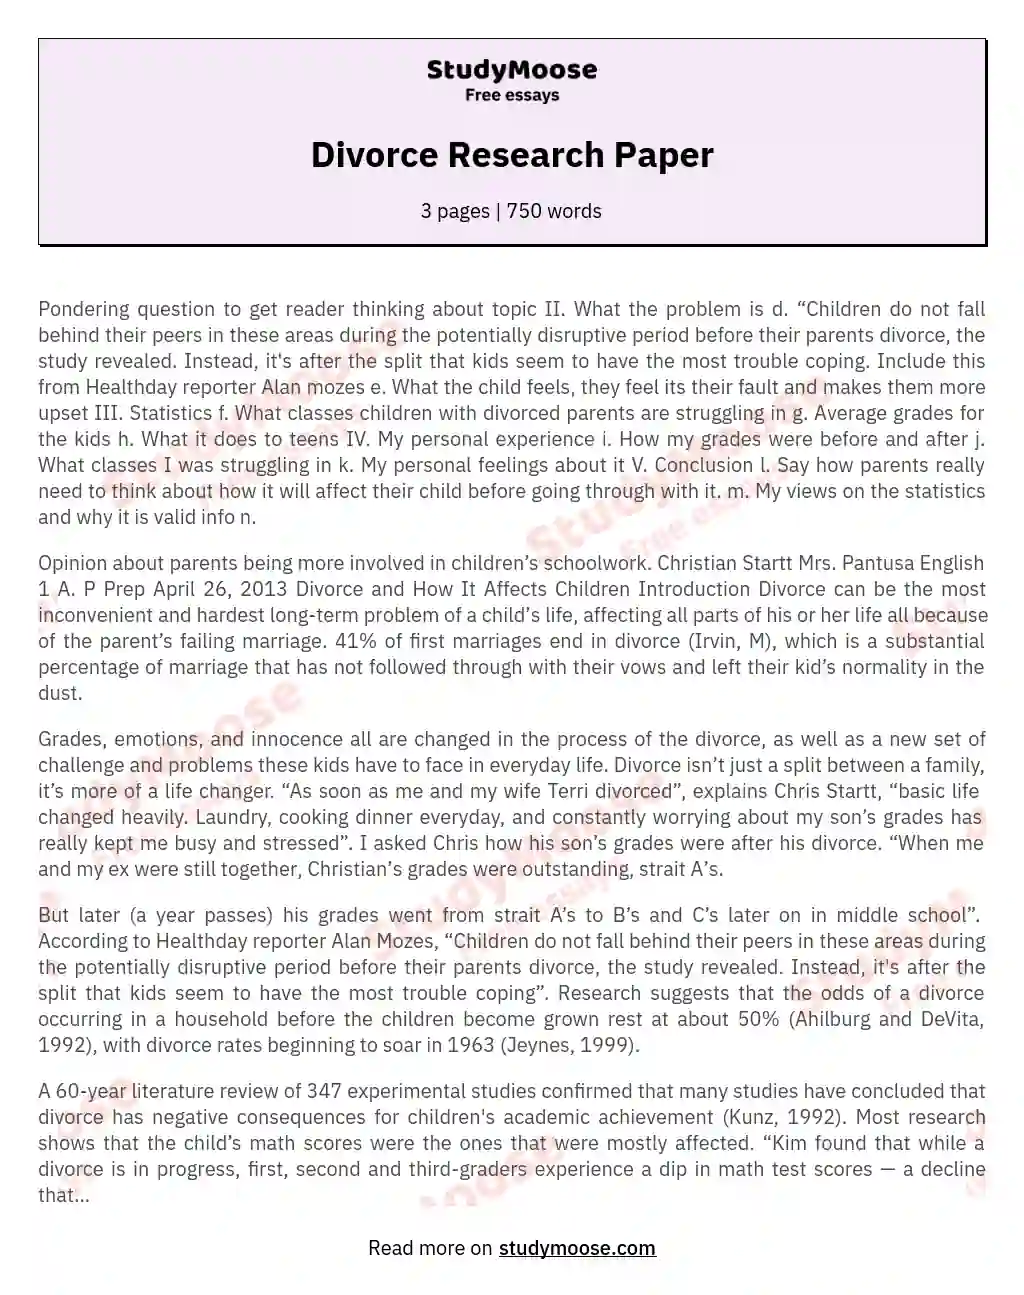 research paper on divorce